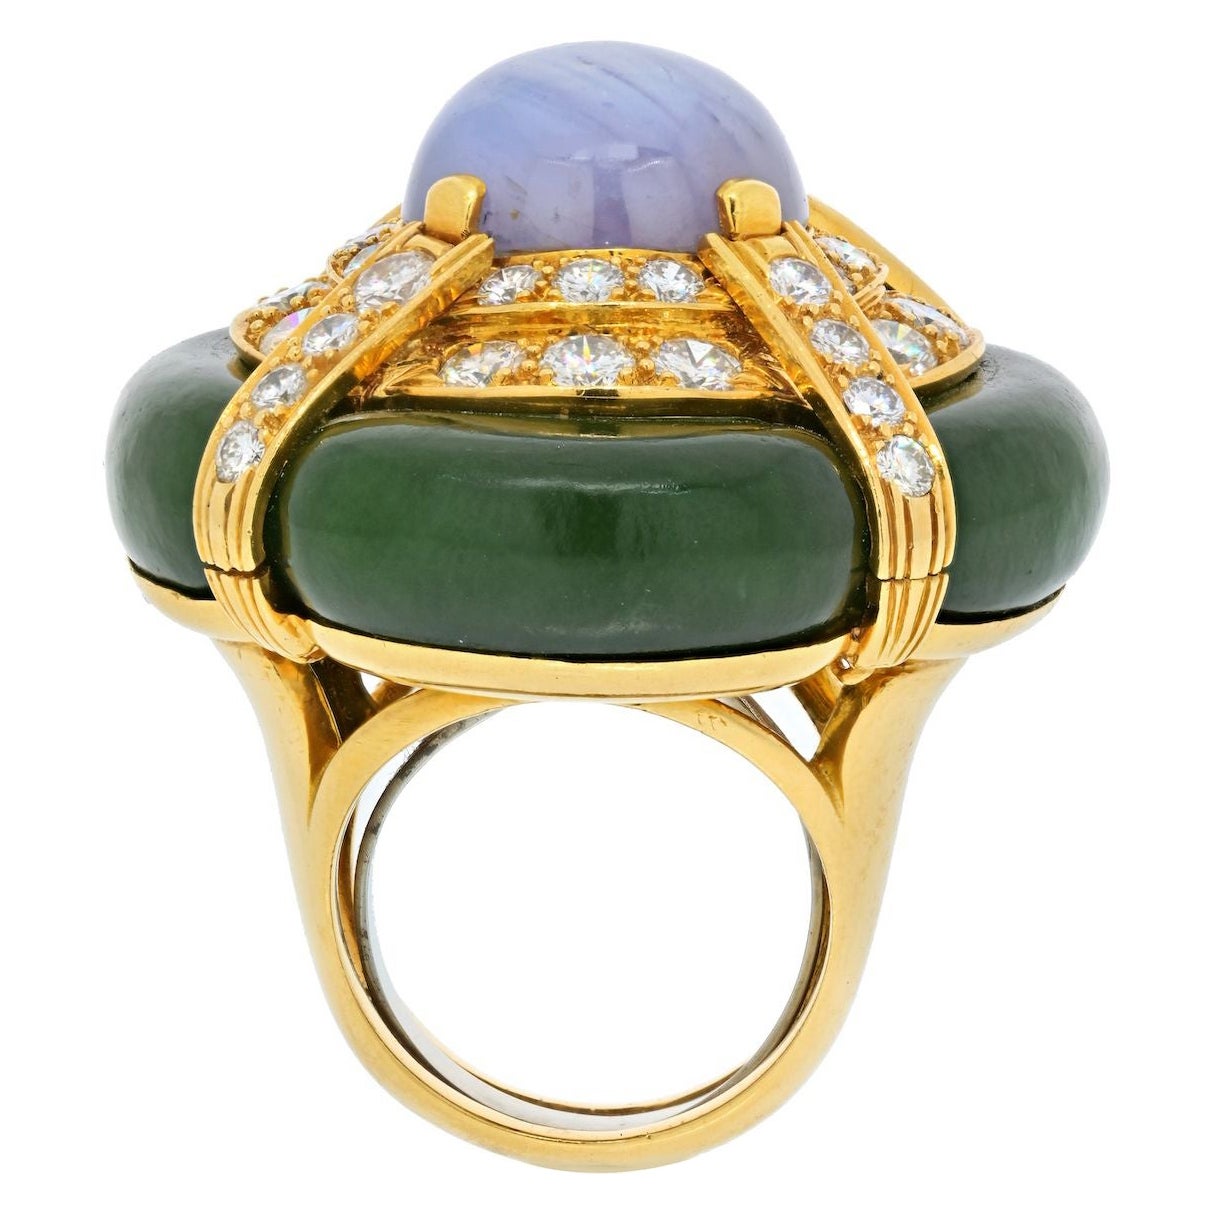 A very impressive ring, just like everything in our closet, this stunning David Webb ring features an oval-shaped star sapphire double cabochon measuring 16.35 x 14.75 mm and weighing approximately 25.00 carats, enhanced by full-cut diamonds